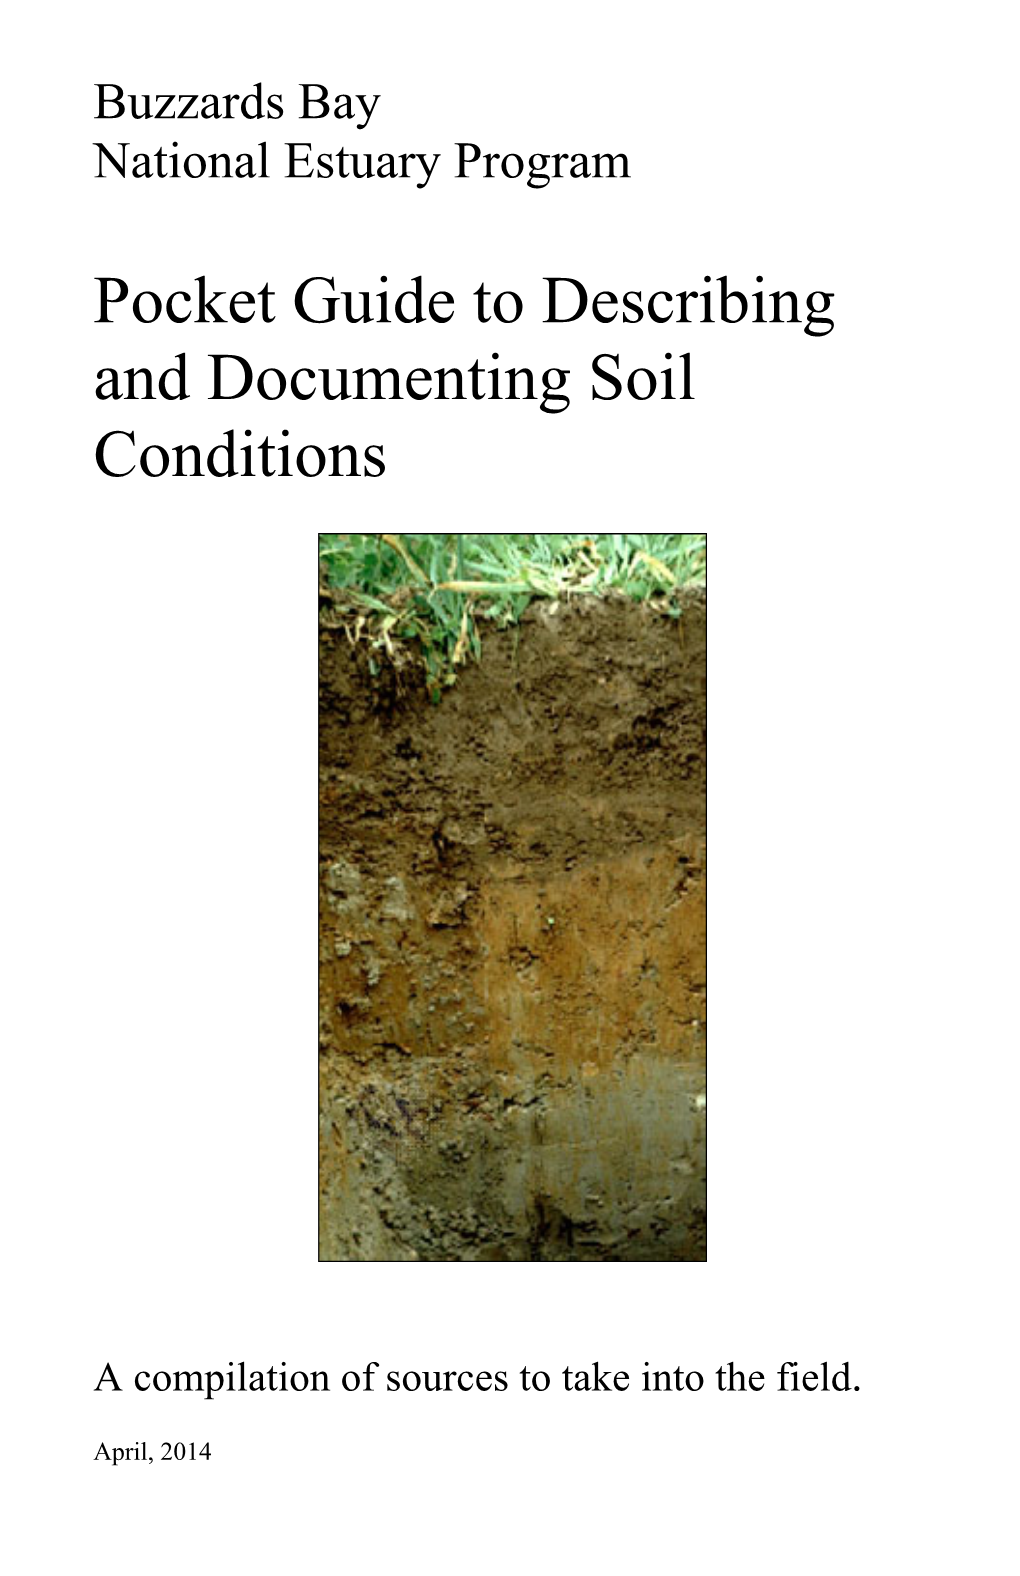 Pocket Guide to Describing and Documenting Soil Conditions